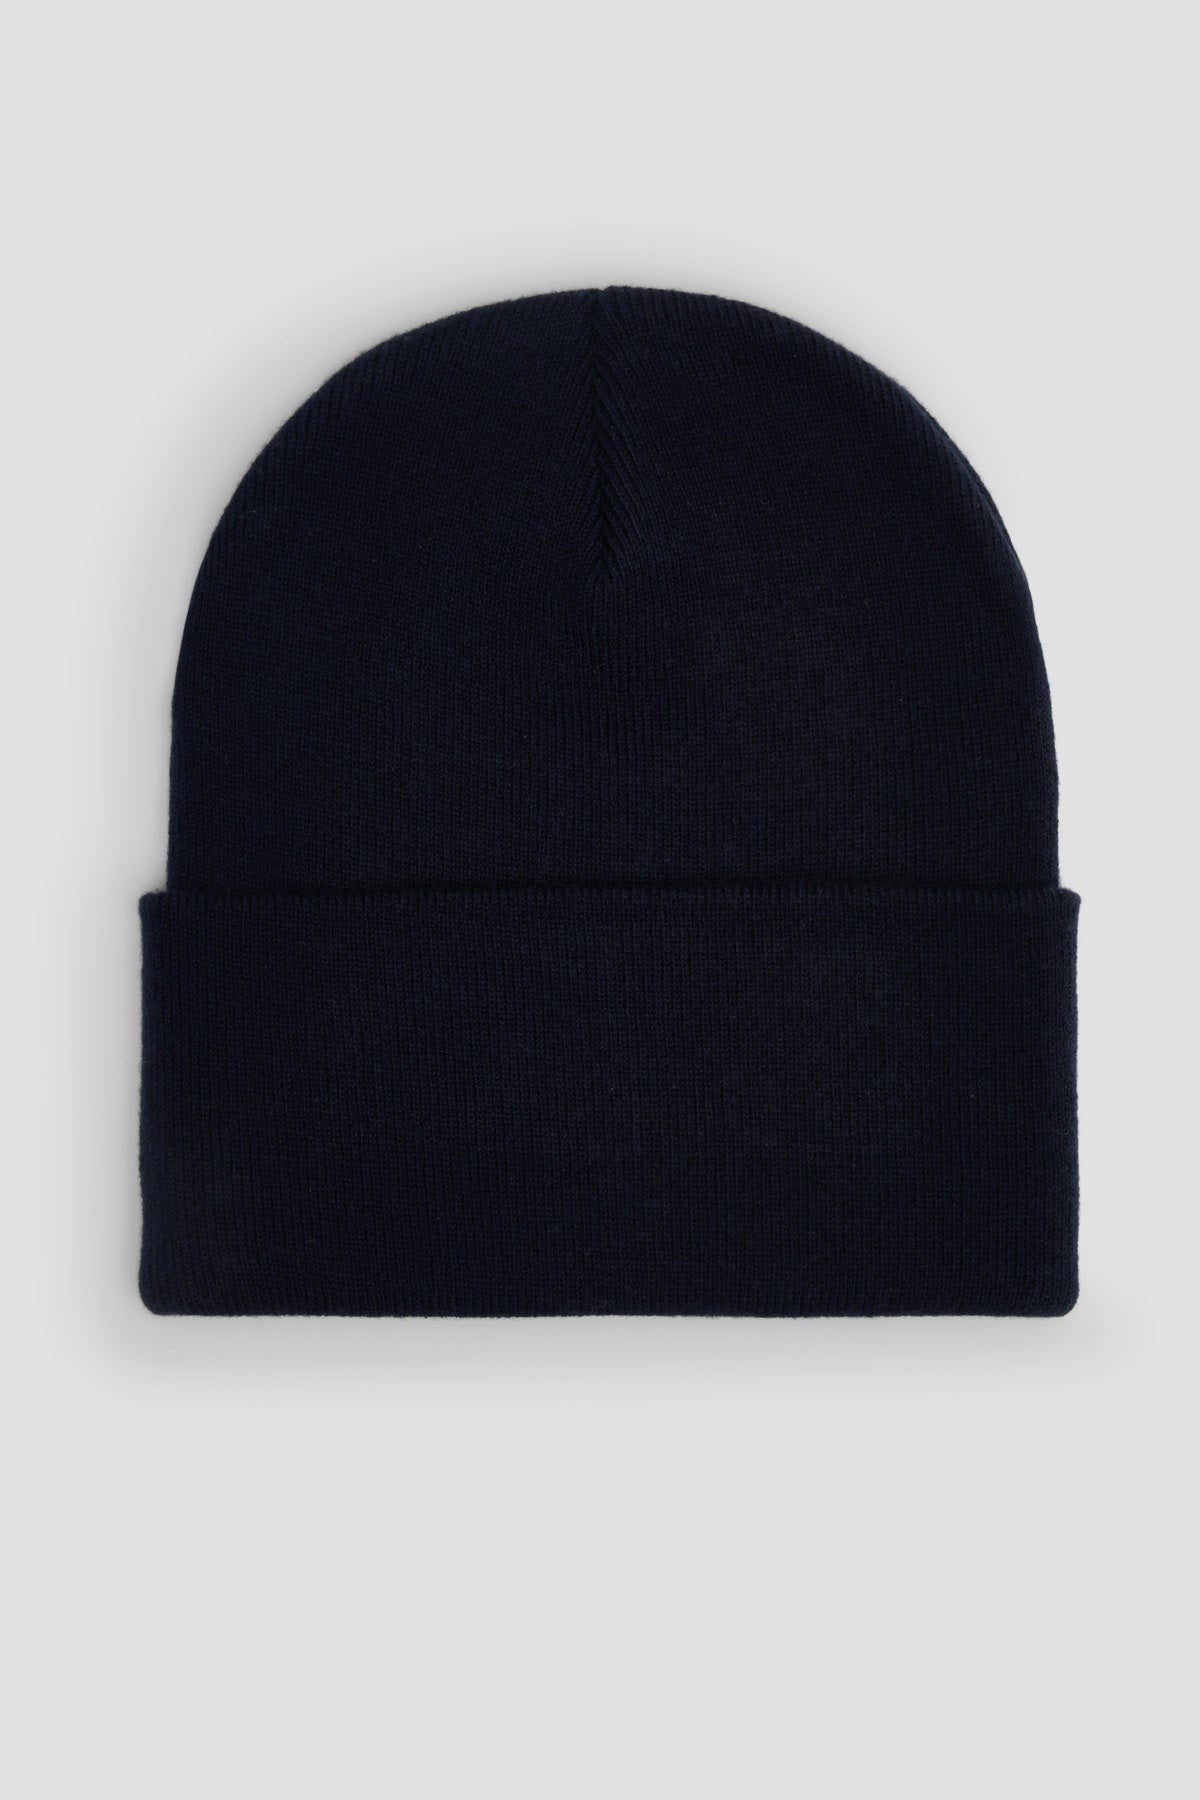 COMO 1907 NAVY BEANIE WITH ROYAL DETAIL